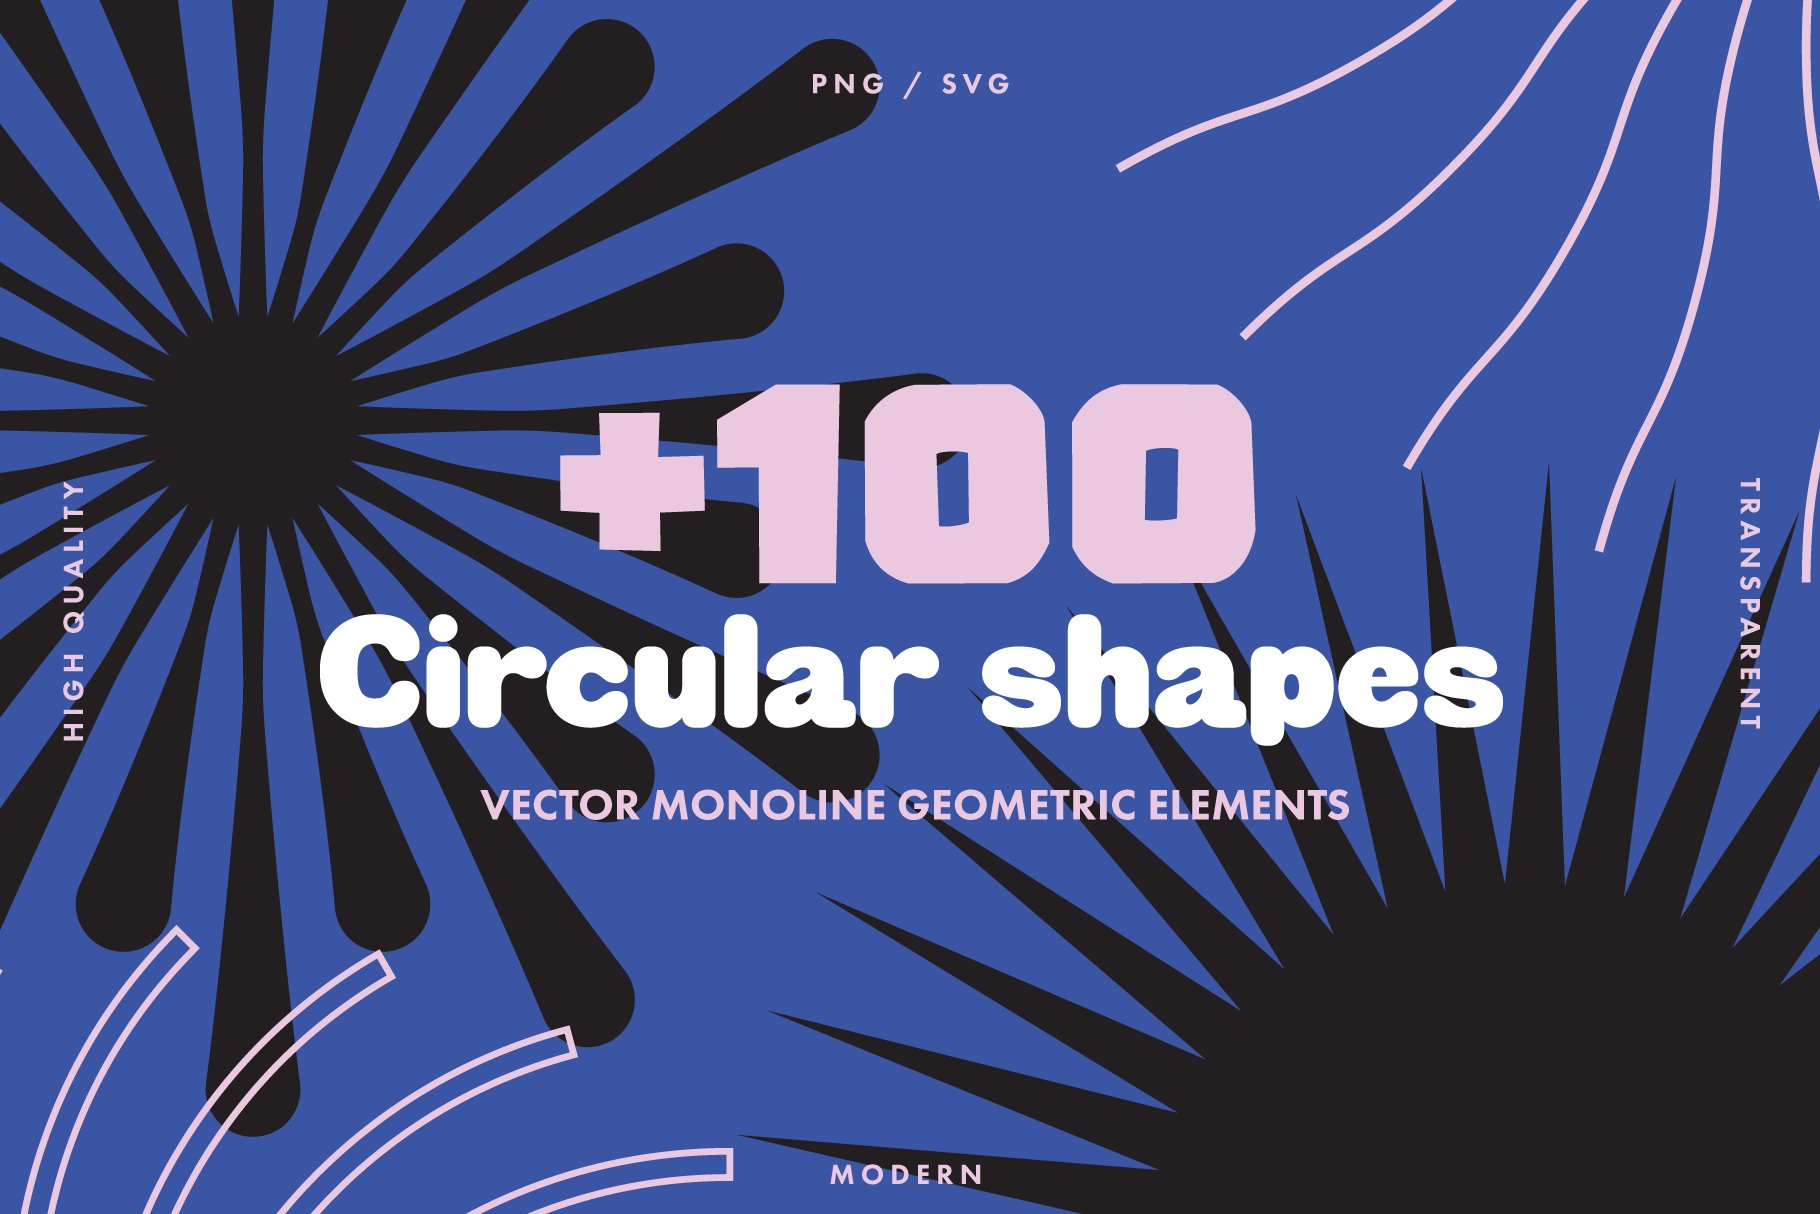 Circular shapes graphic monolinecover image.